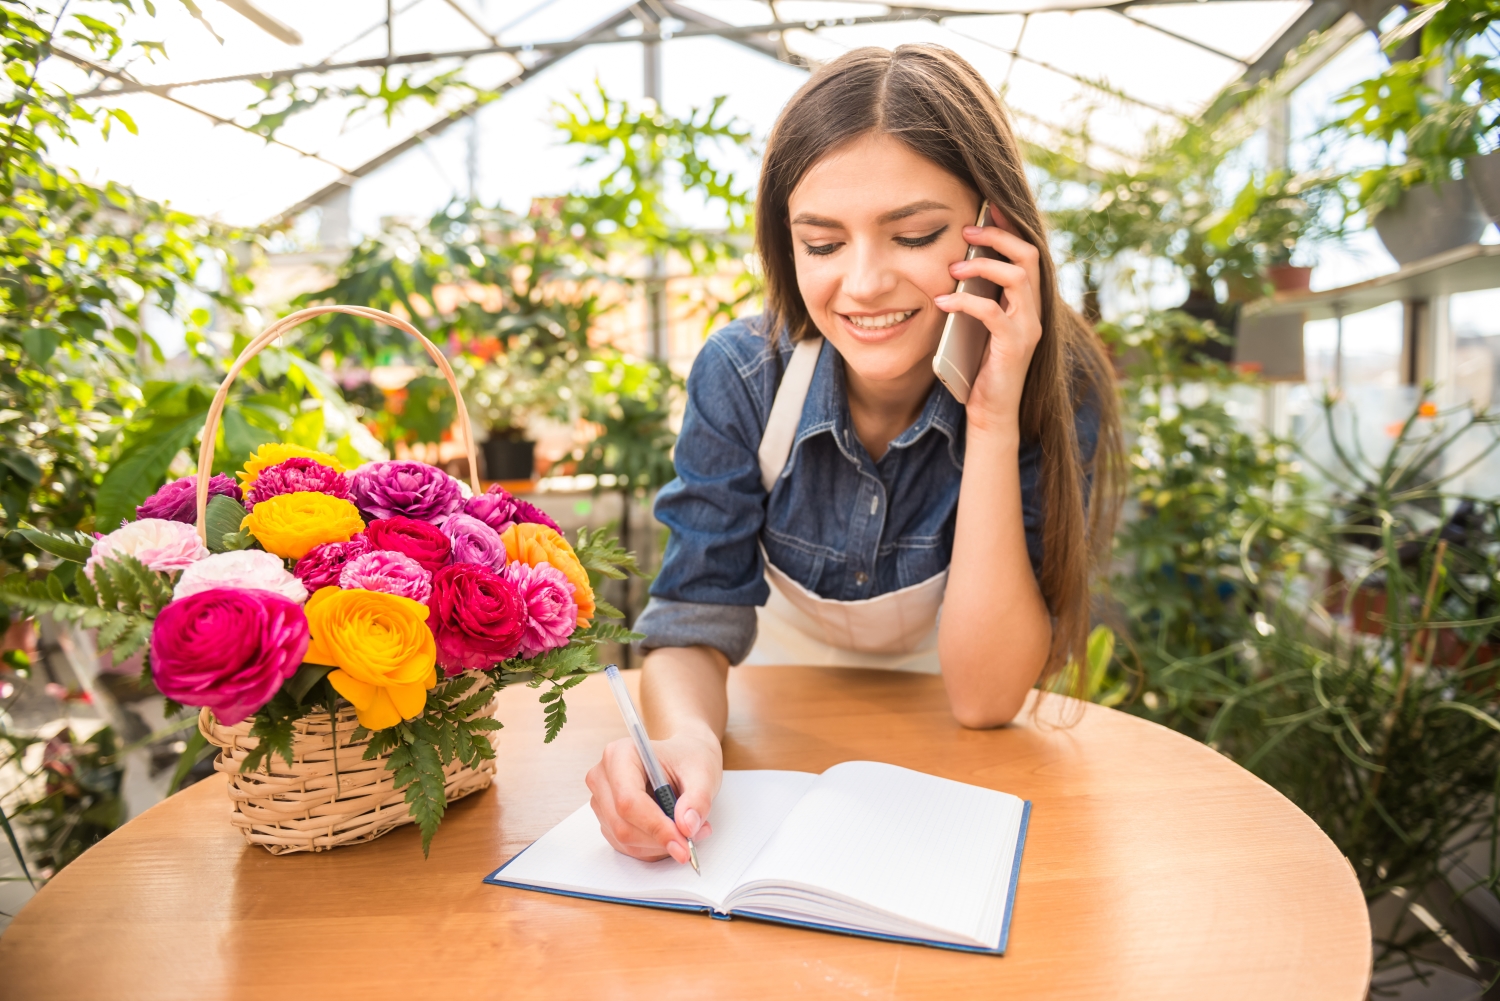 This is image of a cheerful flower shop business owner chatting with a client on the phone